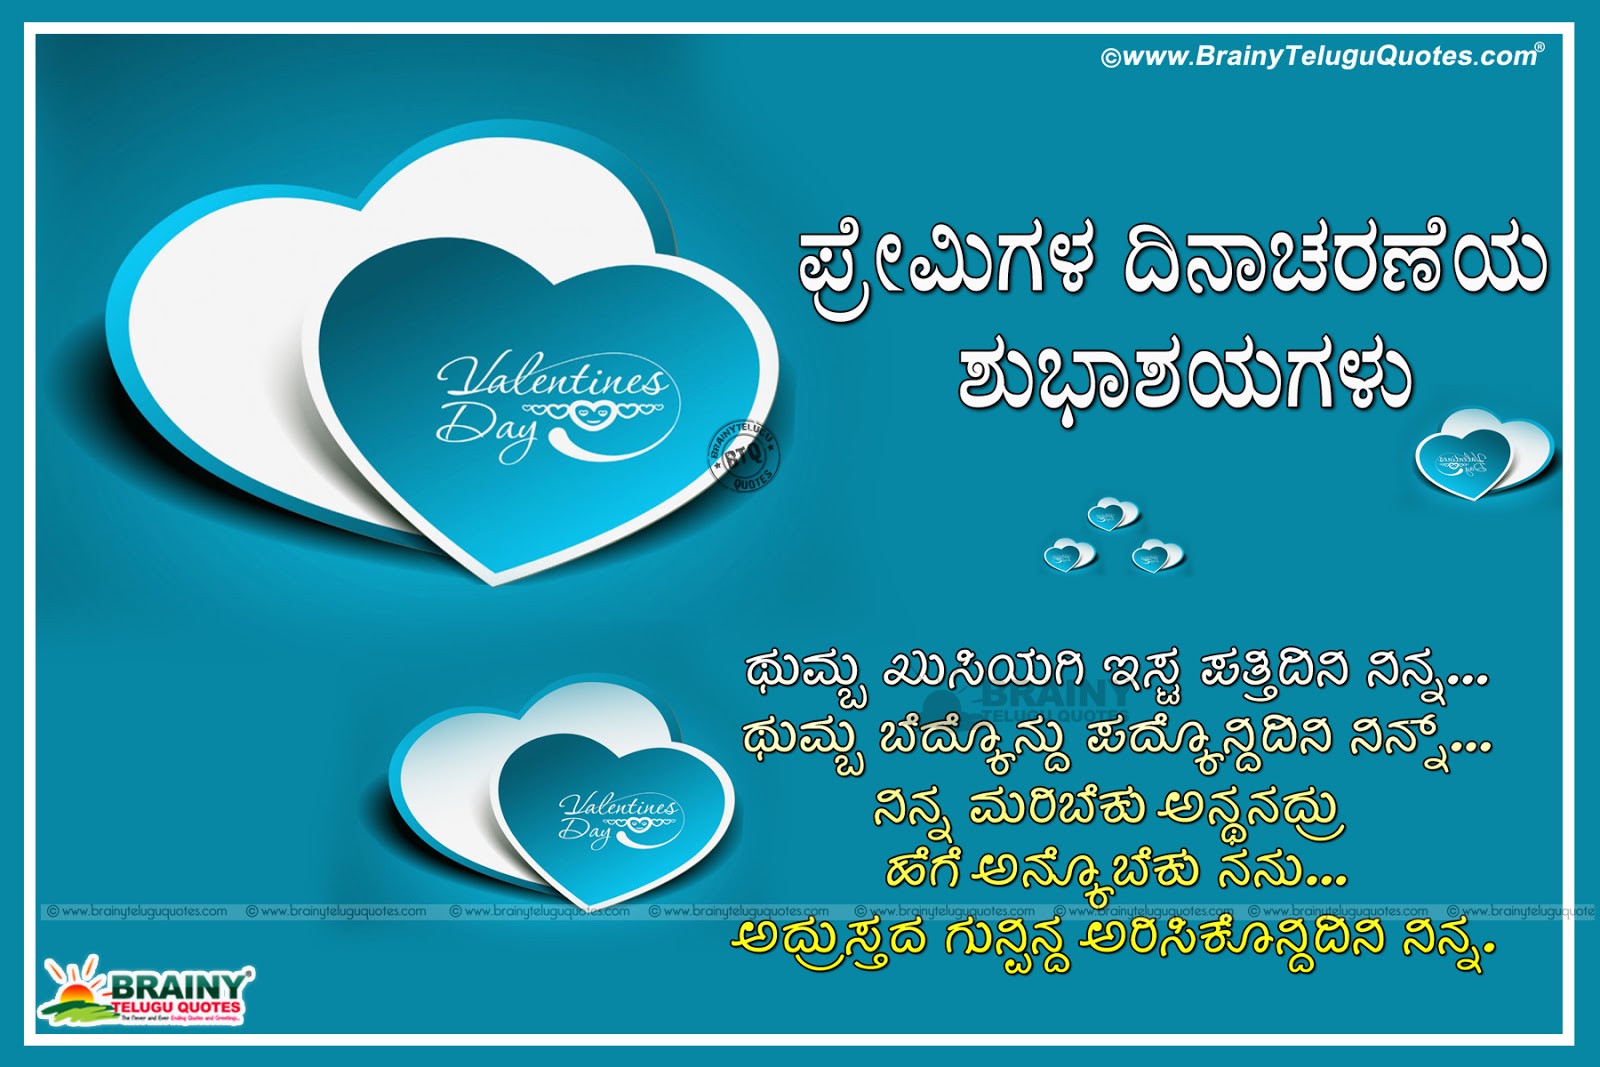 Famous Kannada Poetry in Kannada Language Hugging Couple hd wallpapers with romantic kannada quotes Kannada